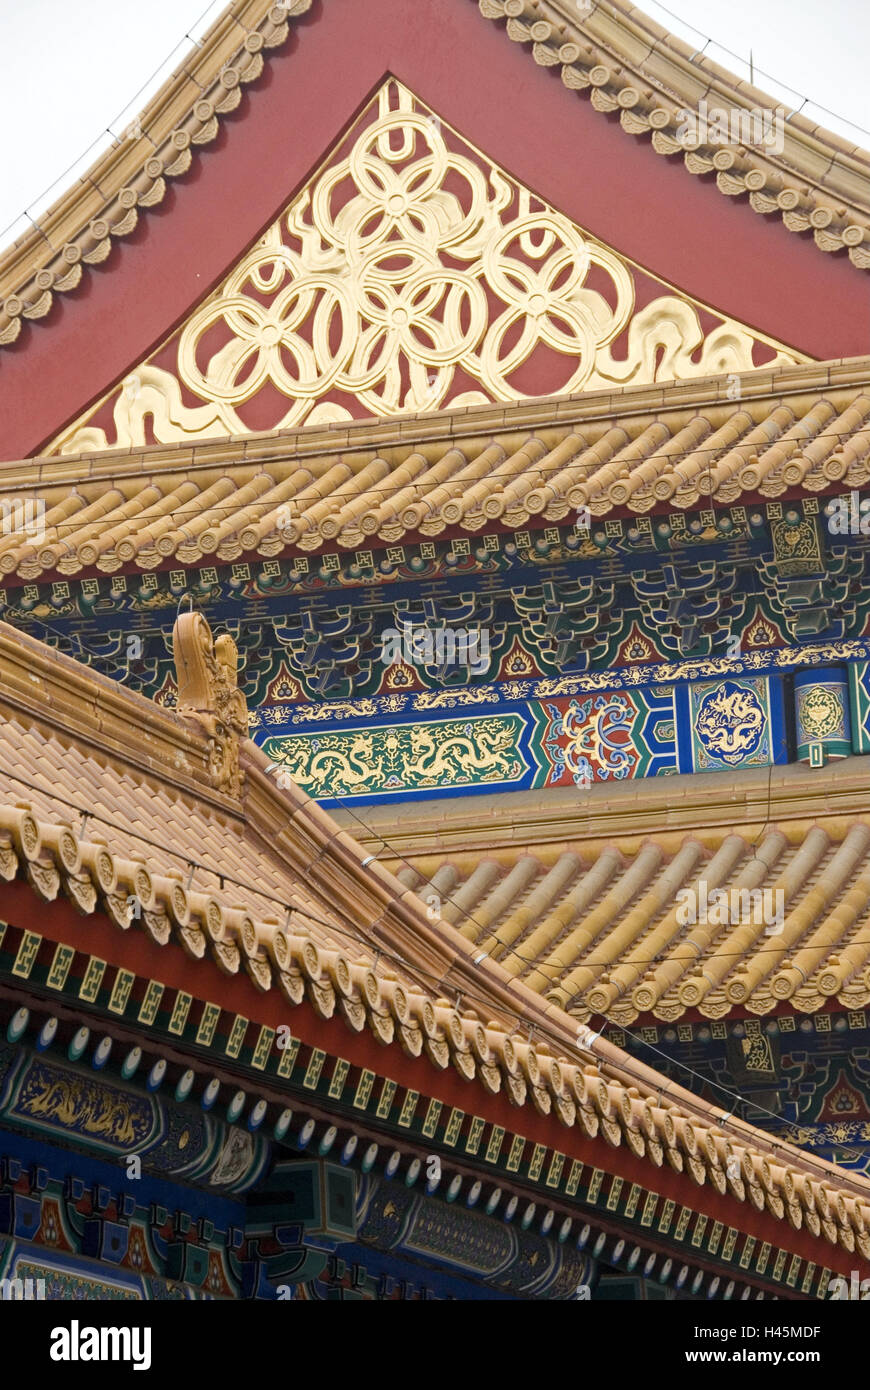 China, Peking, Forbidden City, imperial palace, detail, grace note, Asia, Eastern Asia, town, capital, palace, Gugong, culture, building, structure, architecture, place of interest, culture, tourism, art, roof, ornaments, Stock Photo